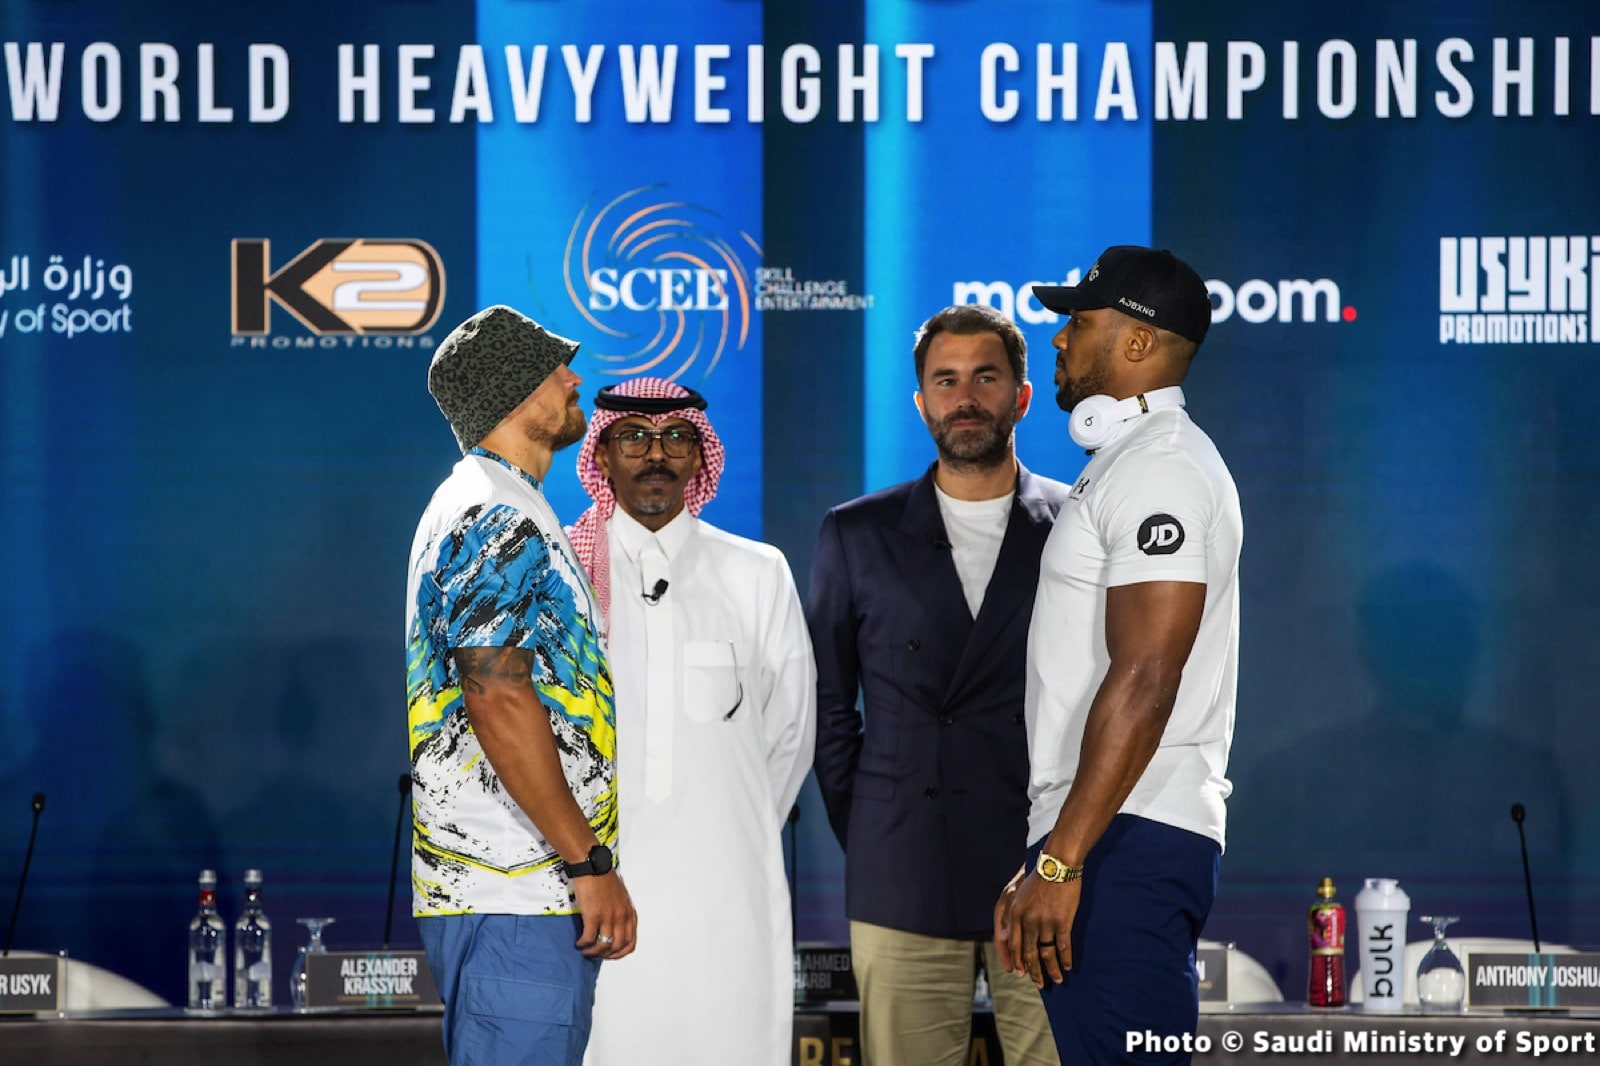 Usyk vs Joshua 2 Jeddah Press Conference Quotes